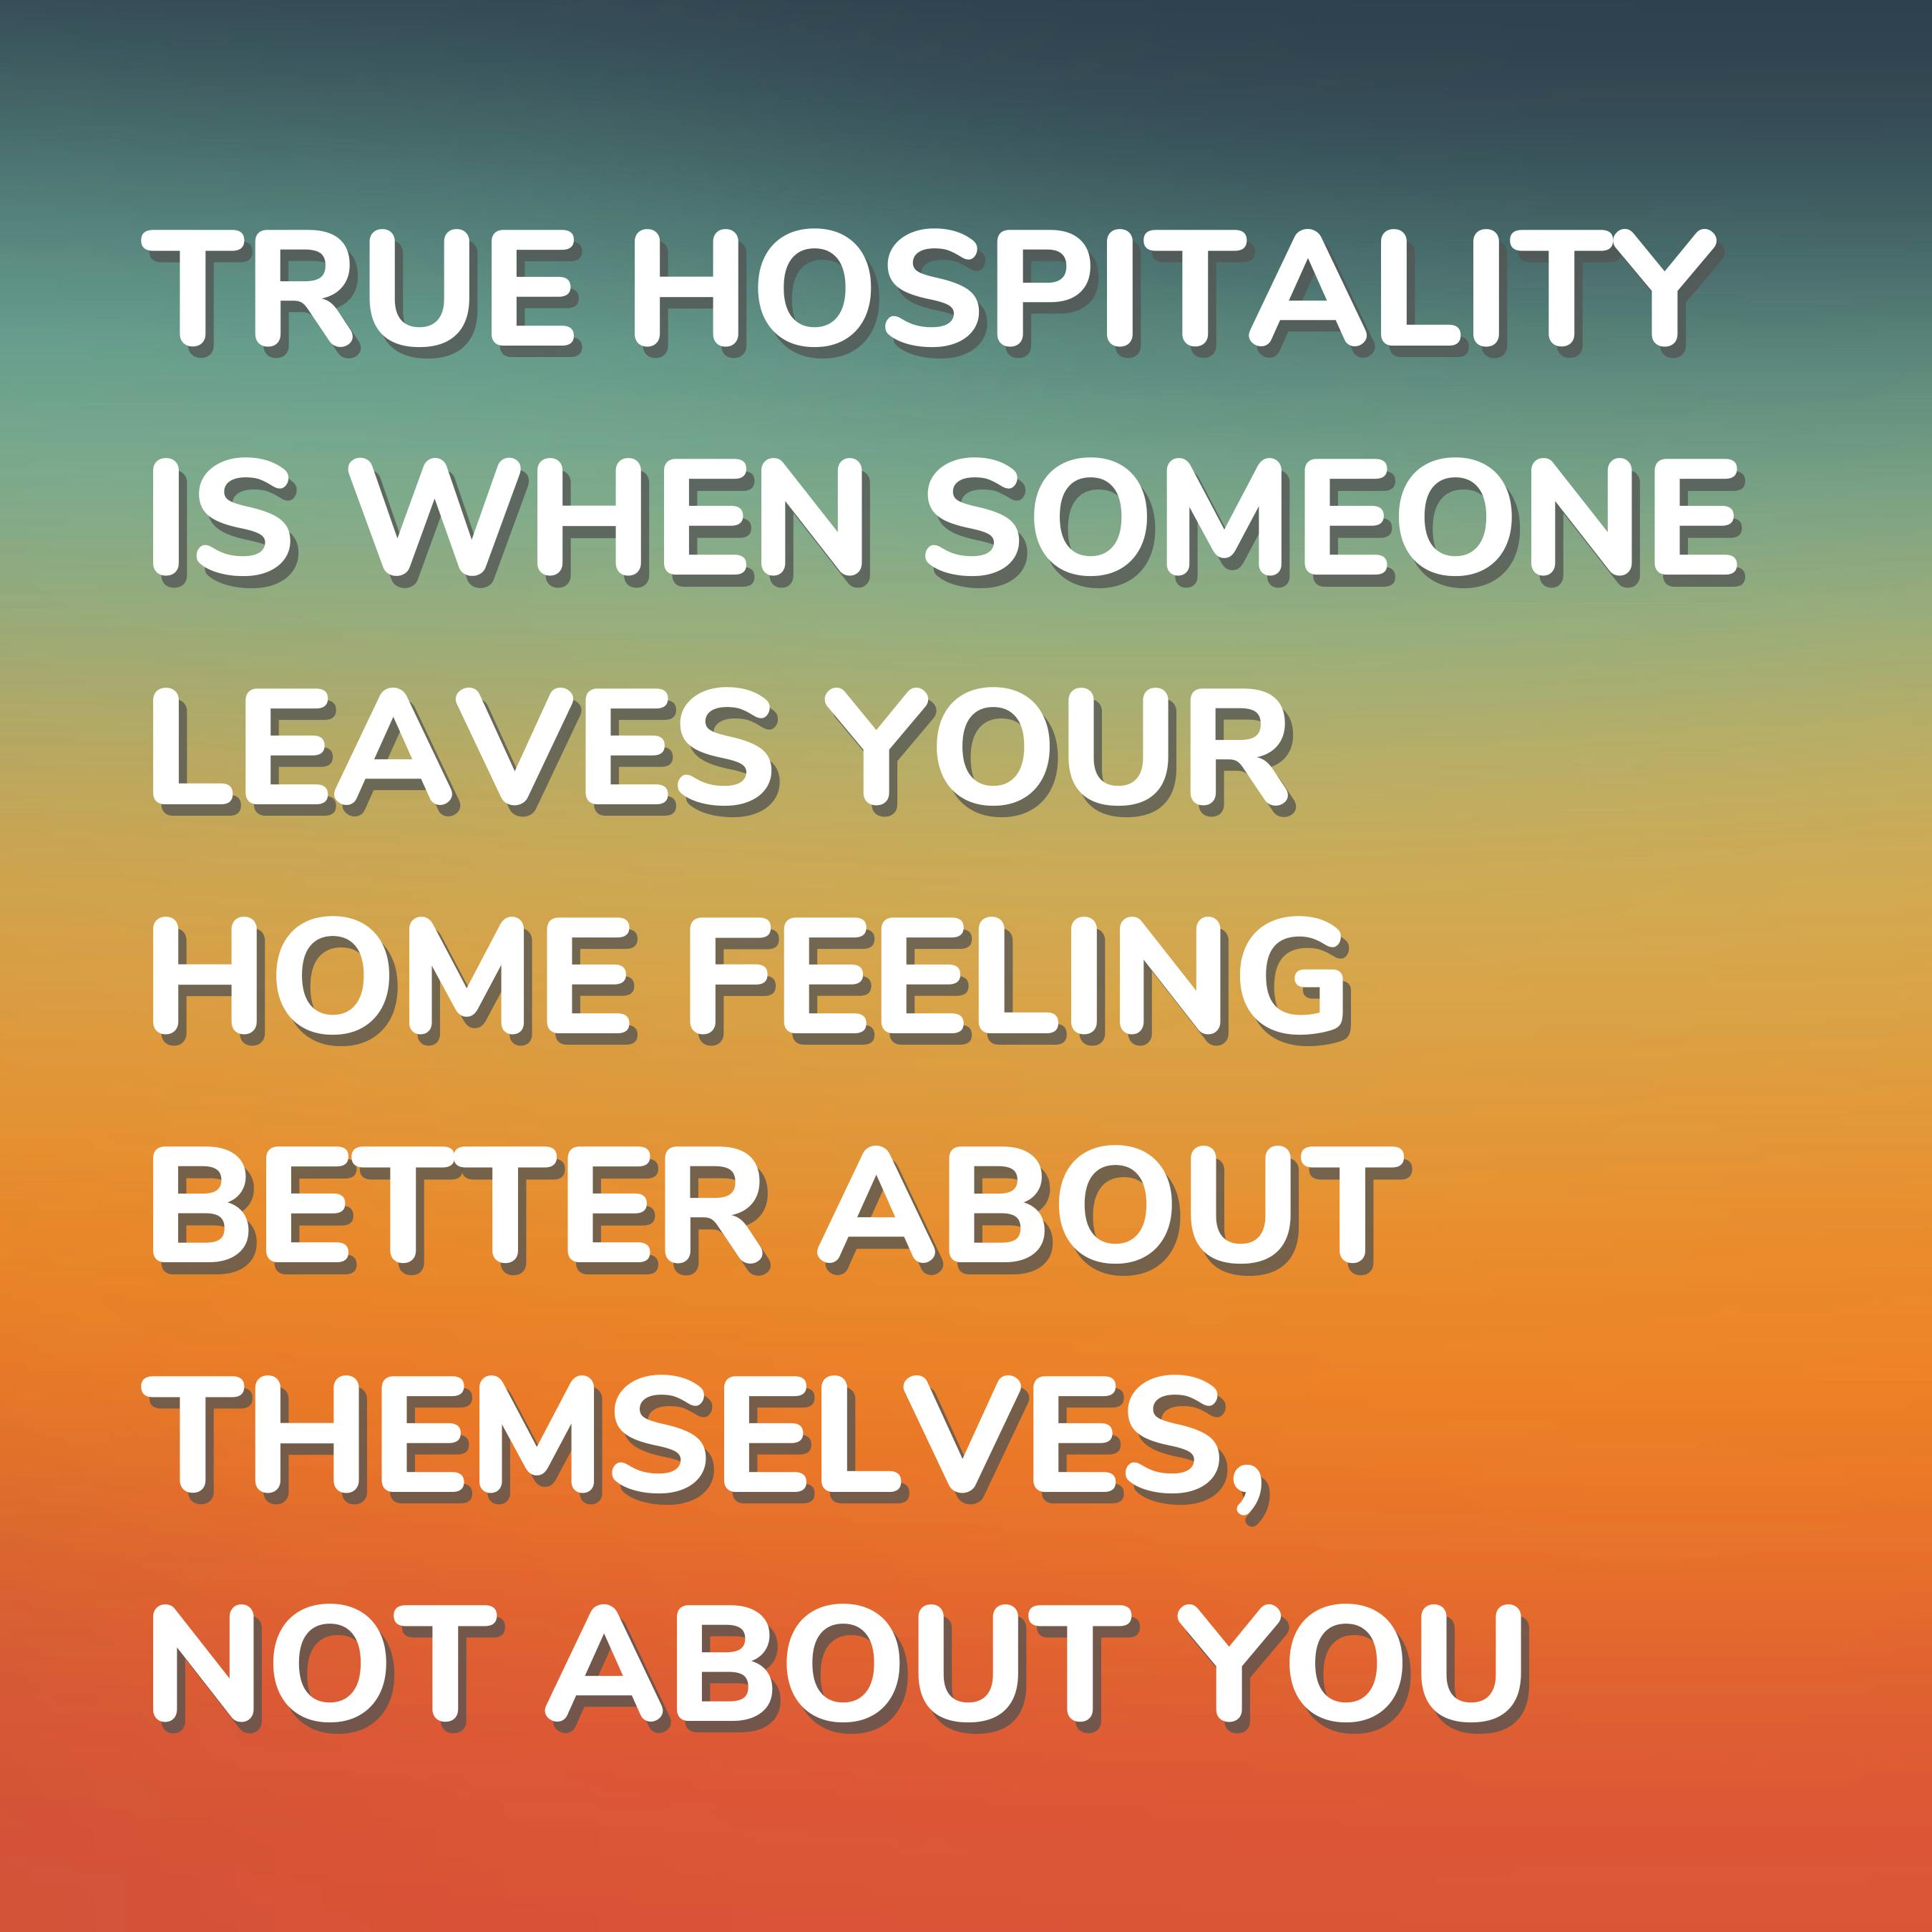 true hospitality is when someone leaves your home feeling better about themselves, in gradient background